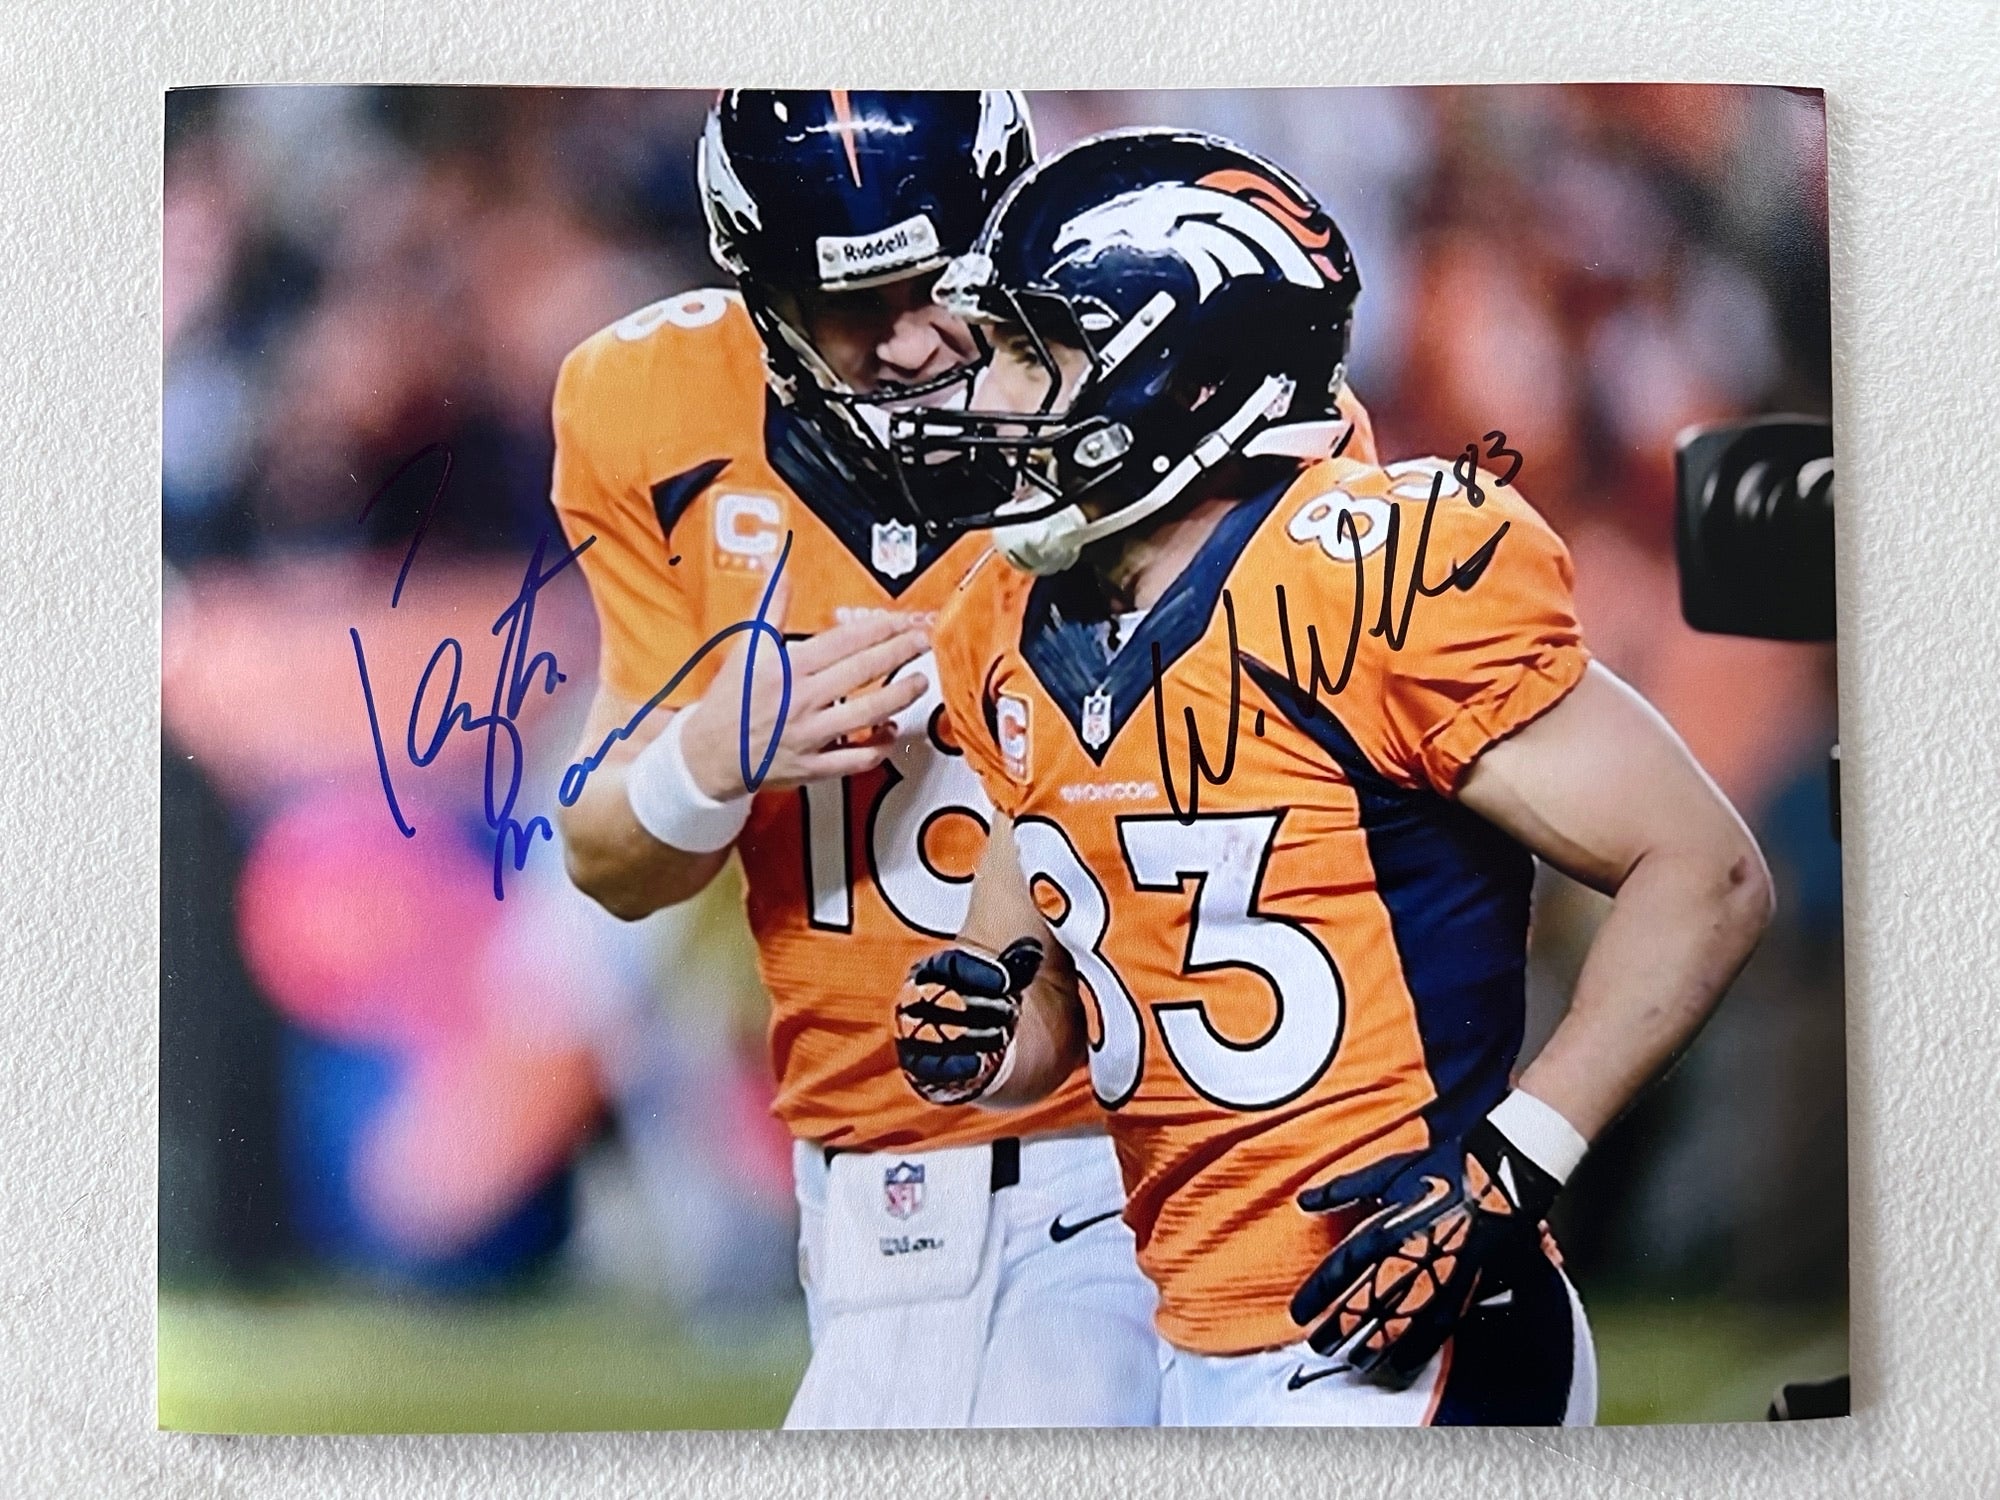 Peyton Manning and Wes Welker 8x10 photo signed with proof